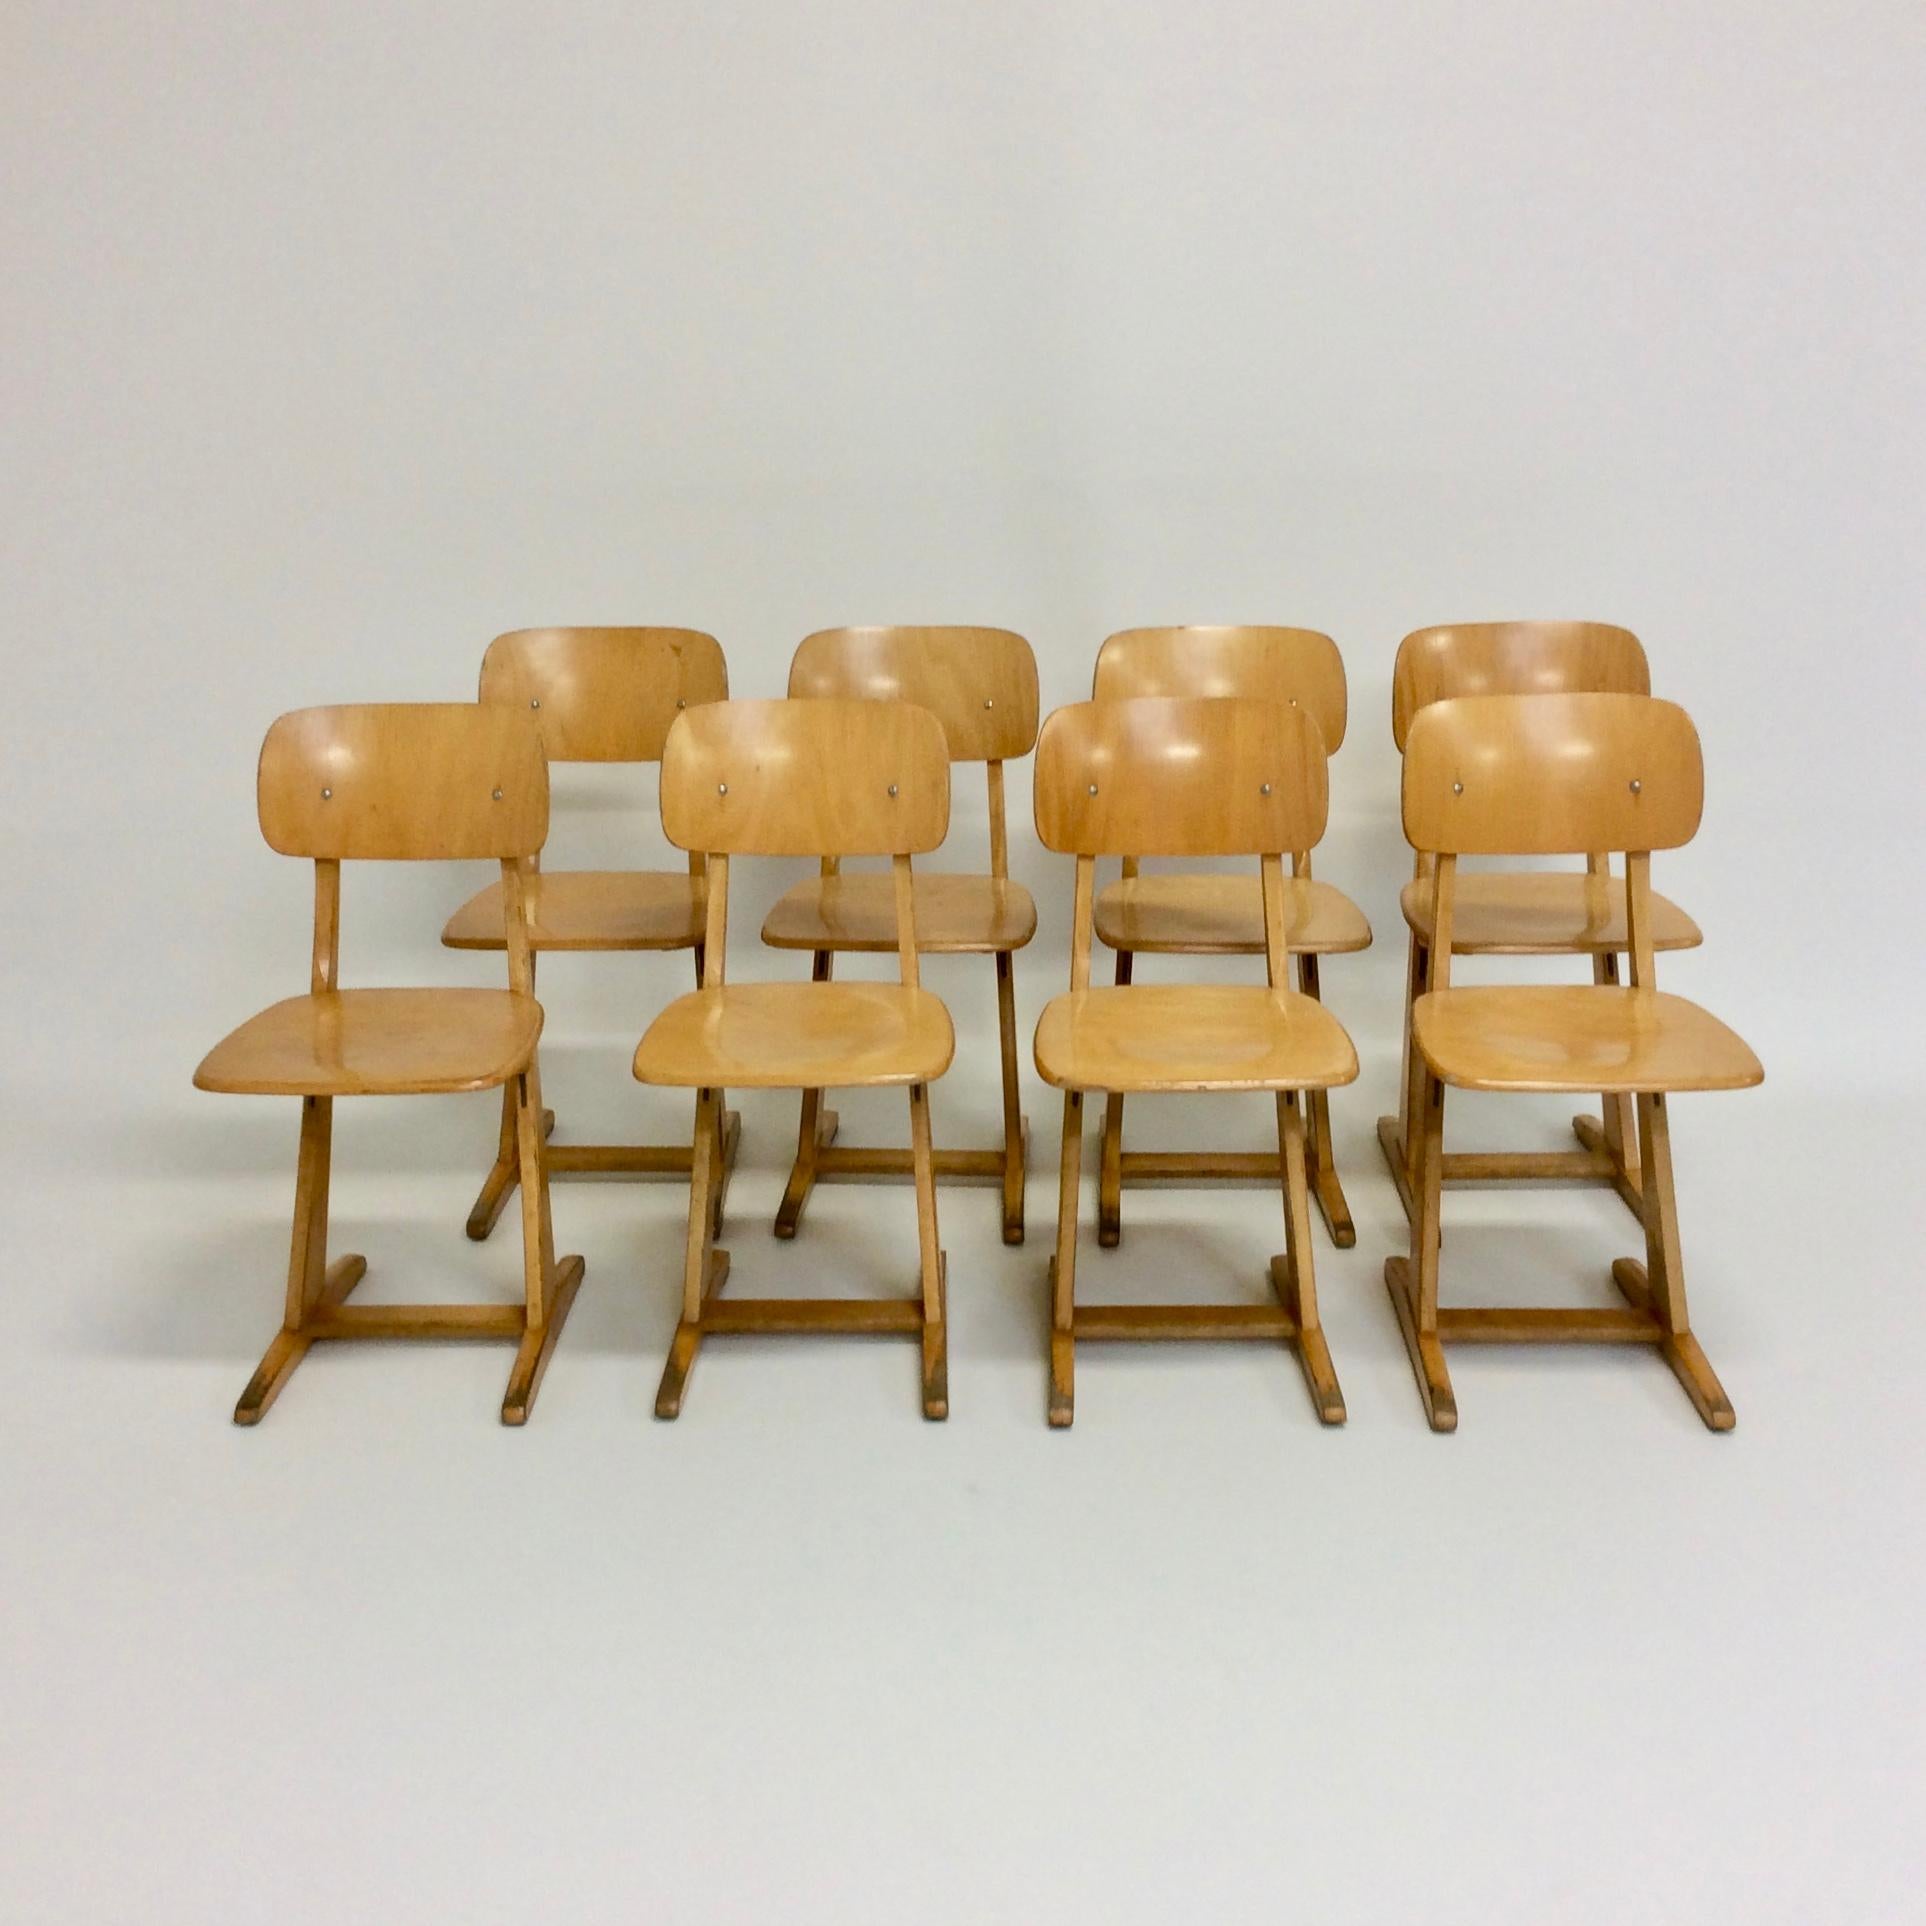 Set of 8 chairs by Karl Nothhelfer for Casala, circa 1960, Germany.
Solid and comfortable chairs.
Varnished light wood and plywood.
Dimensions: 80 cm H, 38 cm W, 45 cm D, seat height: 46 cm.
Good vintage condition.
  